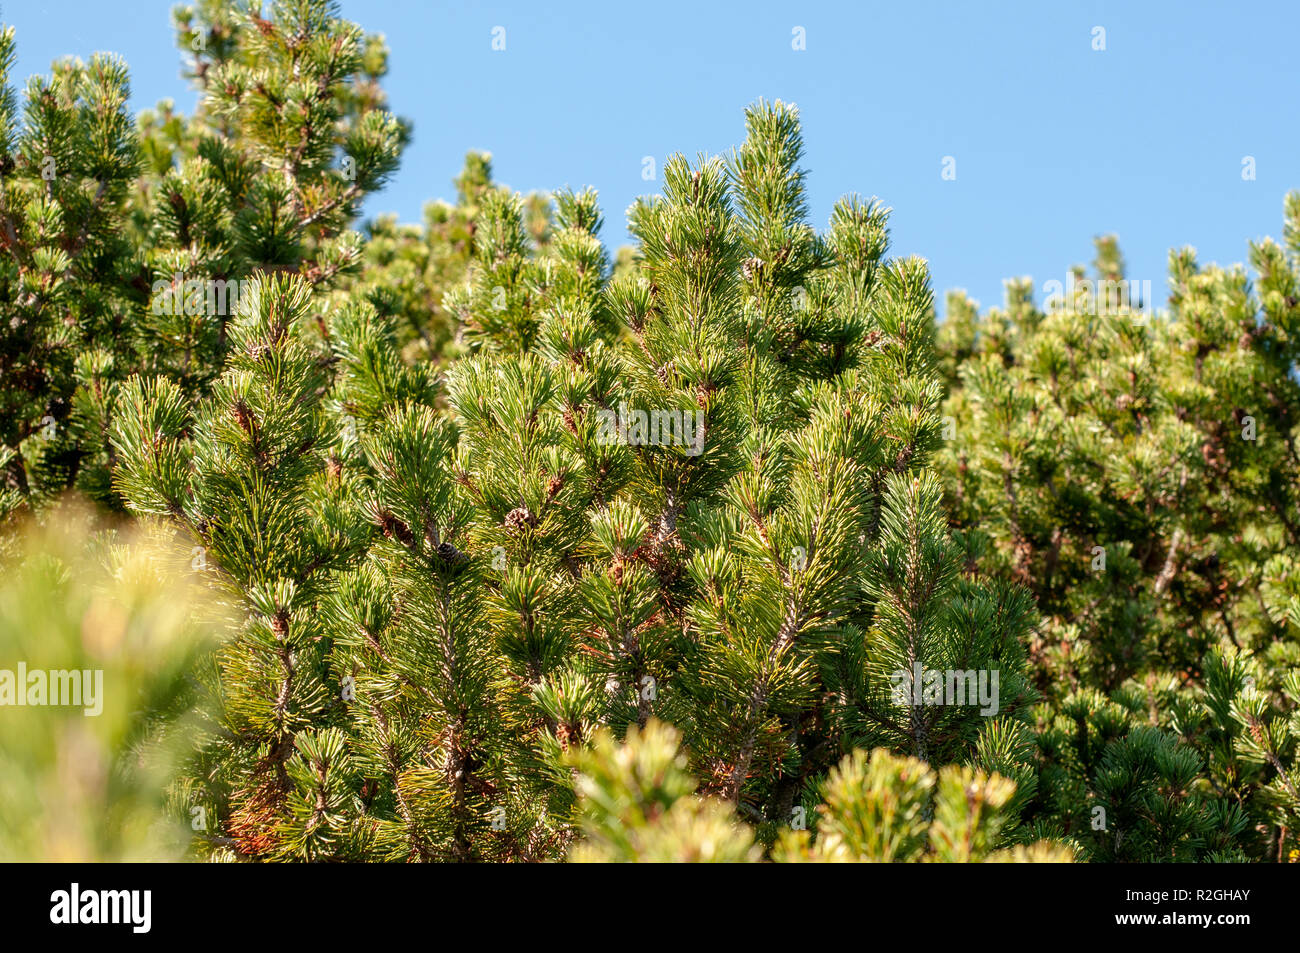 Swiss mountain pine (Pinus mugo) known as creeping pine, dwarf mountainpine, mugo pine, mountain pine or scrub mountain pine is a species of conifer,  Stock Photo